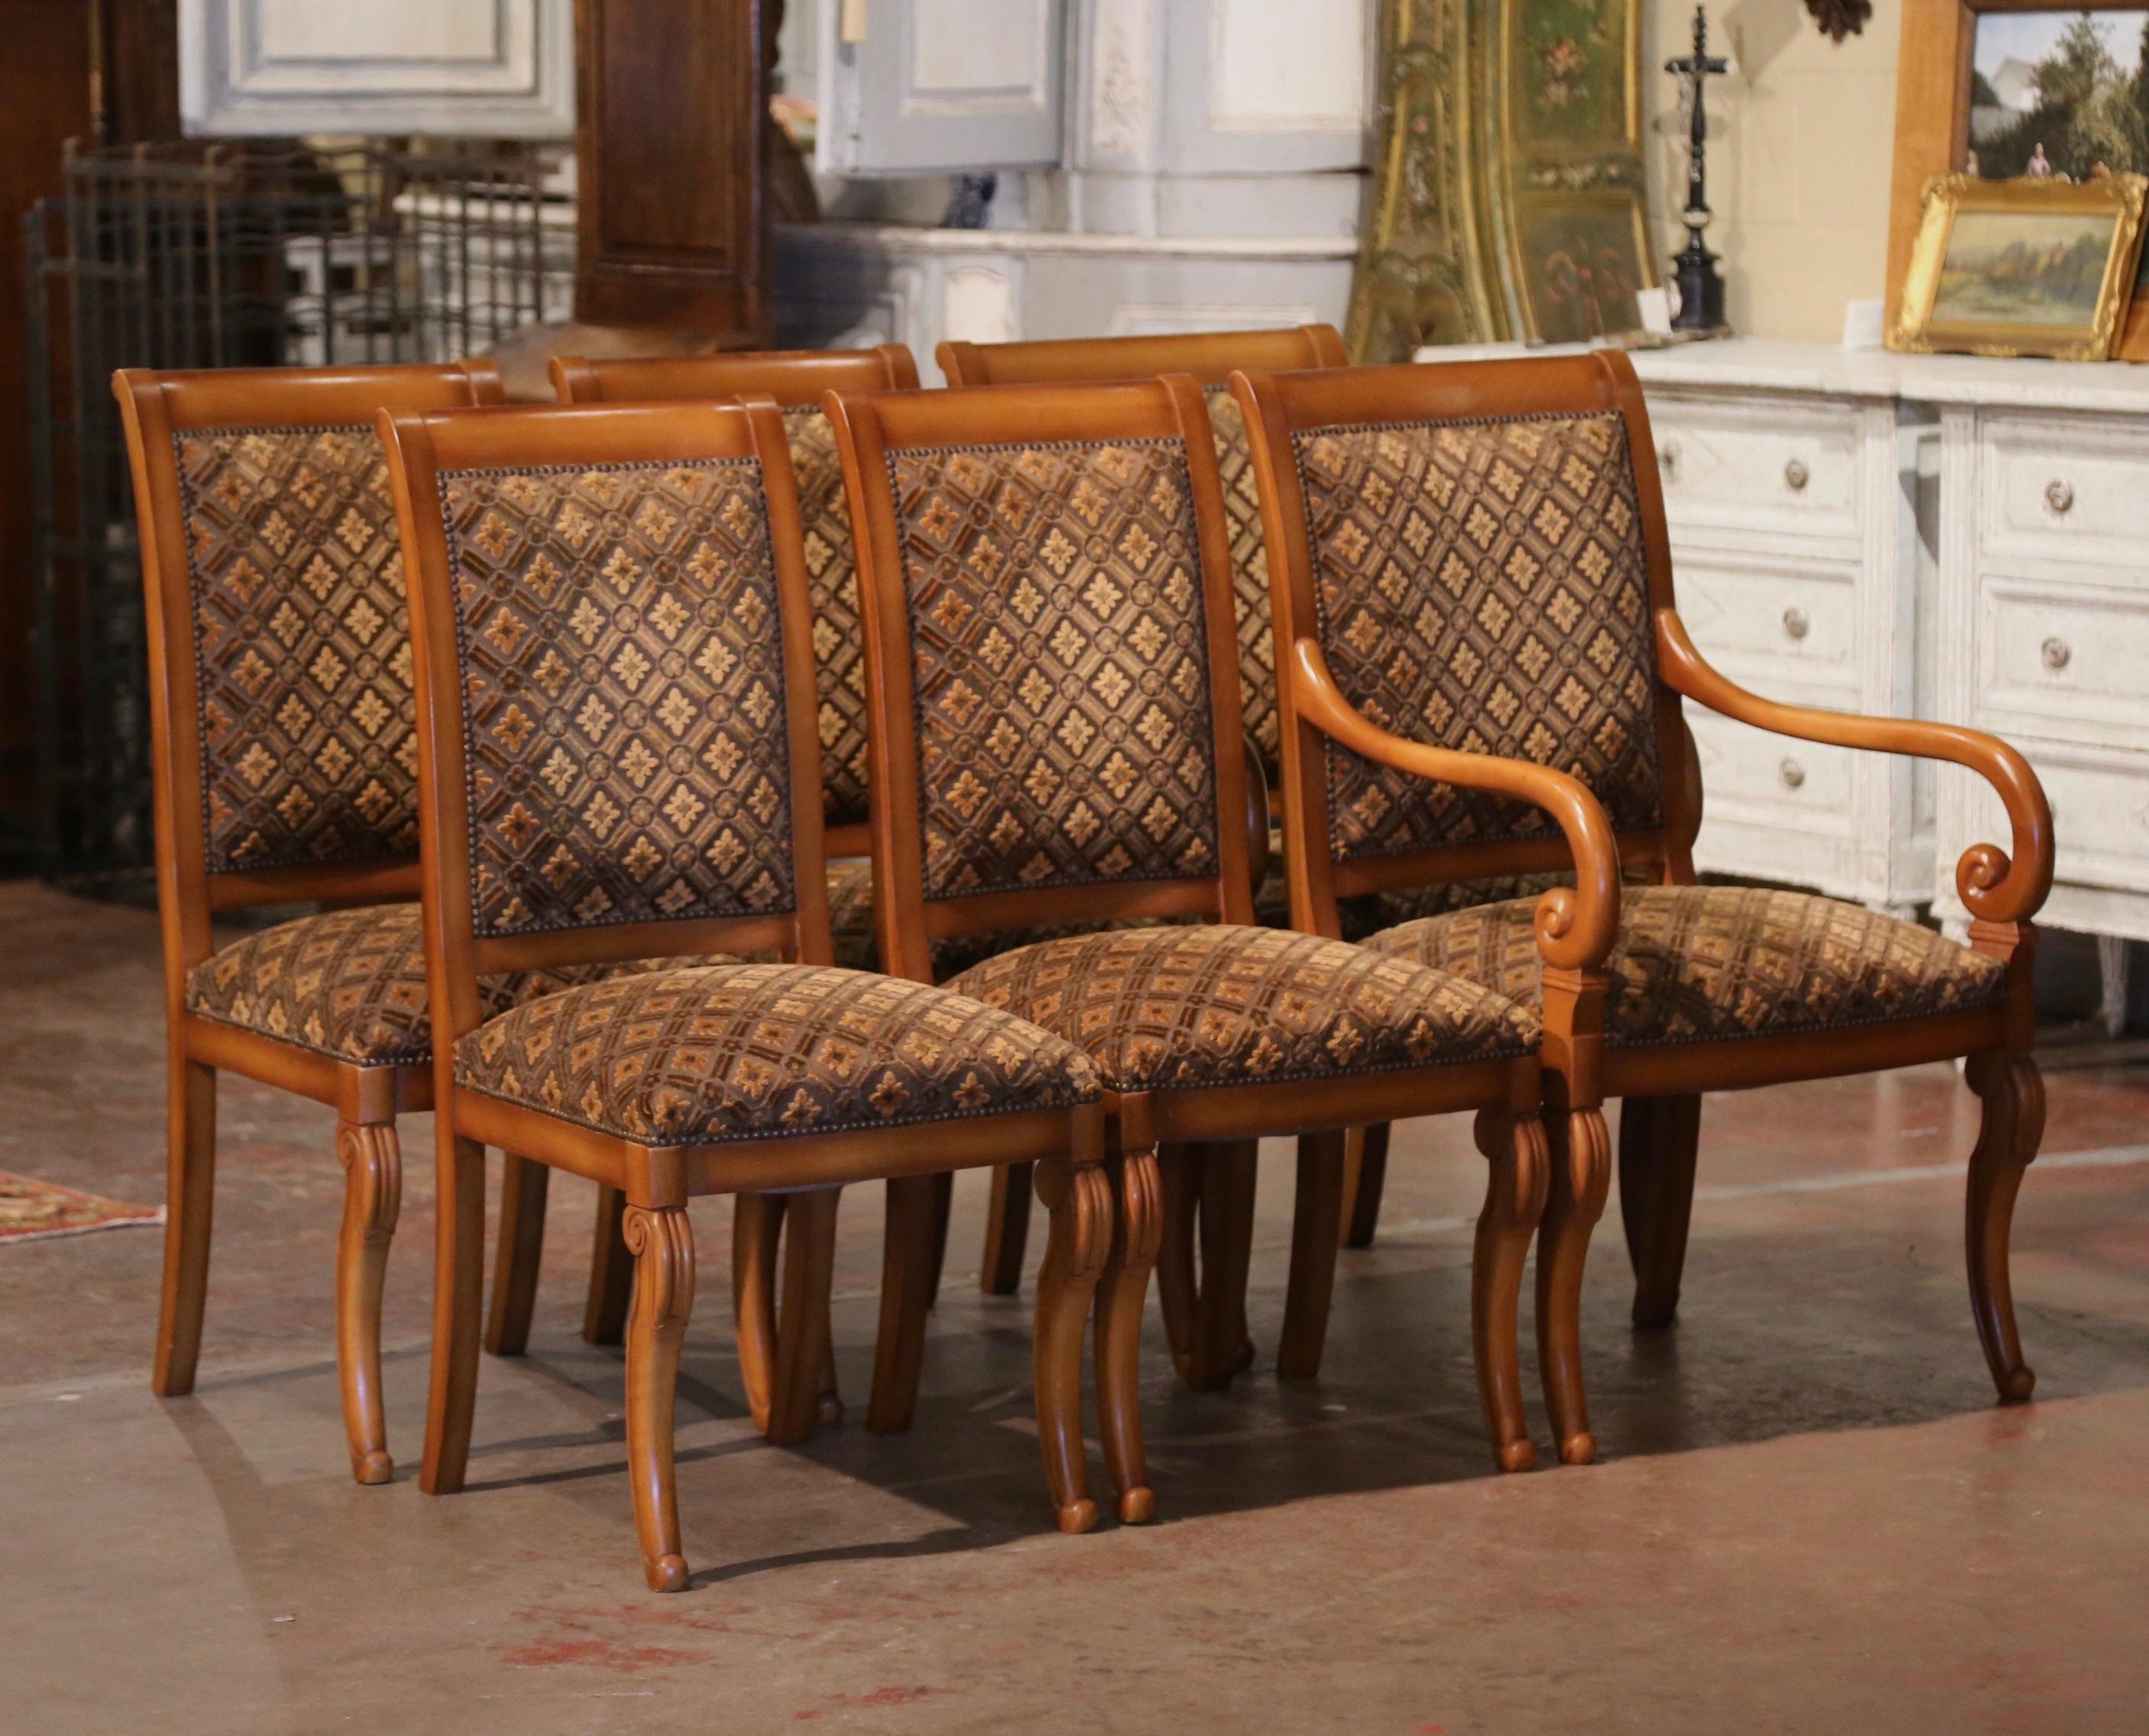 Dress a breakfast table with this elegant set of four sidechairs and matching armchairs. Crafted in France circa 1970 from walnut wood, each chair stands on cabriole legs ending in scroll feet over a straight bombe apron. Each chair has a wide and